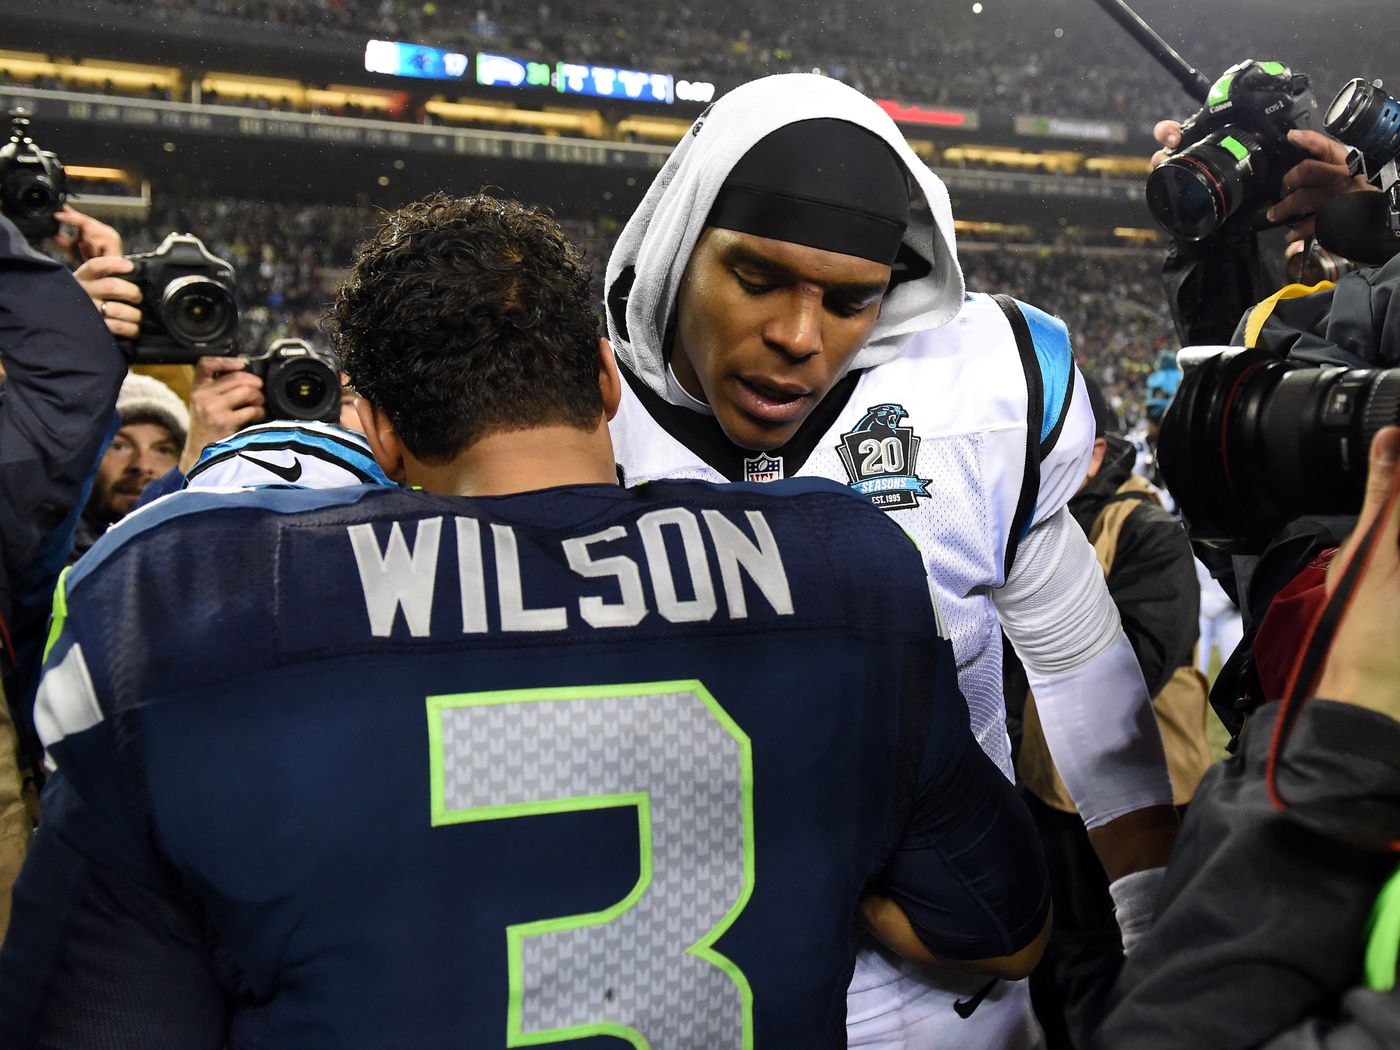 2016 NFL Playoffs - Seahawks vs Panthers: Odds, betting lines and